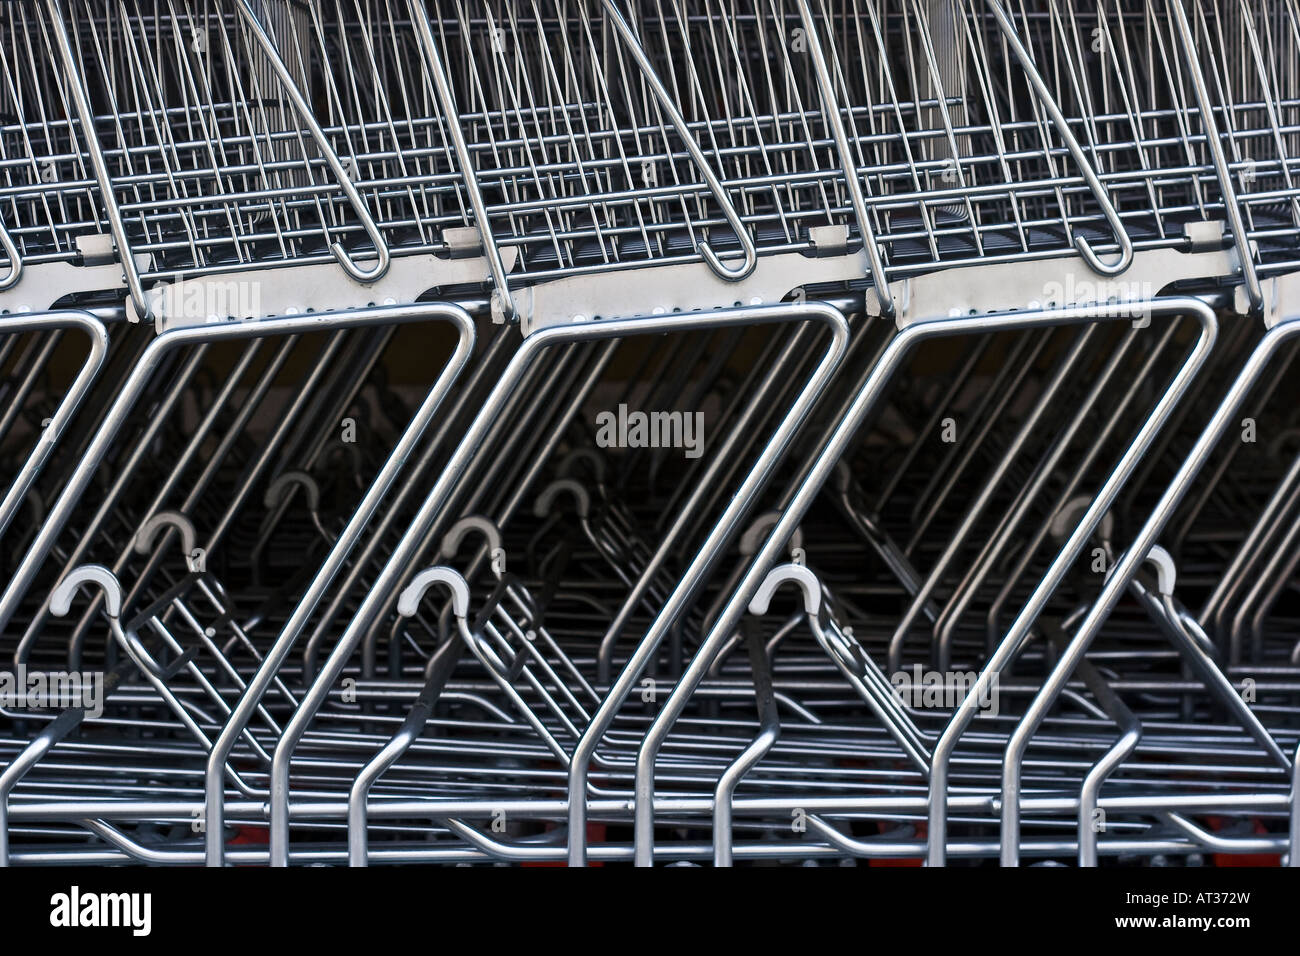 A detailed view of shopping carts stacked in a row outside a supermarket Stock Photo